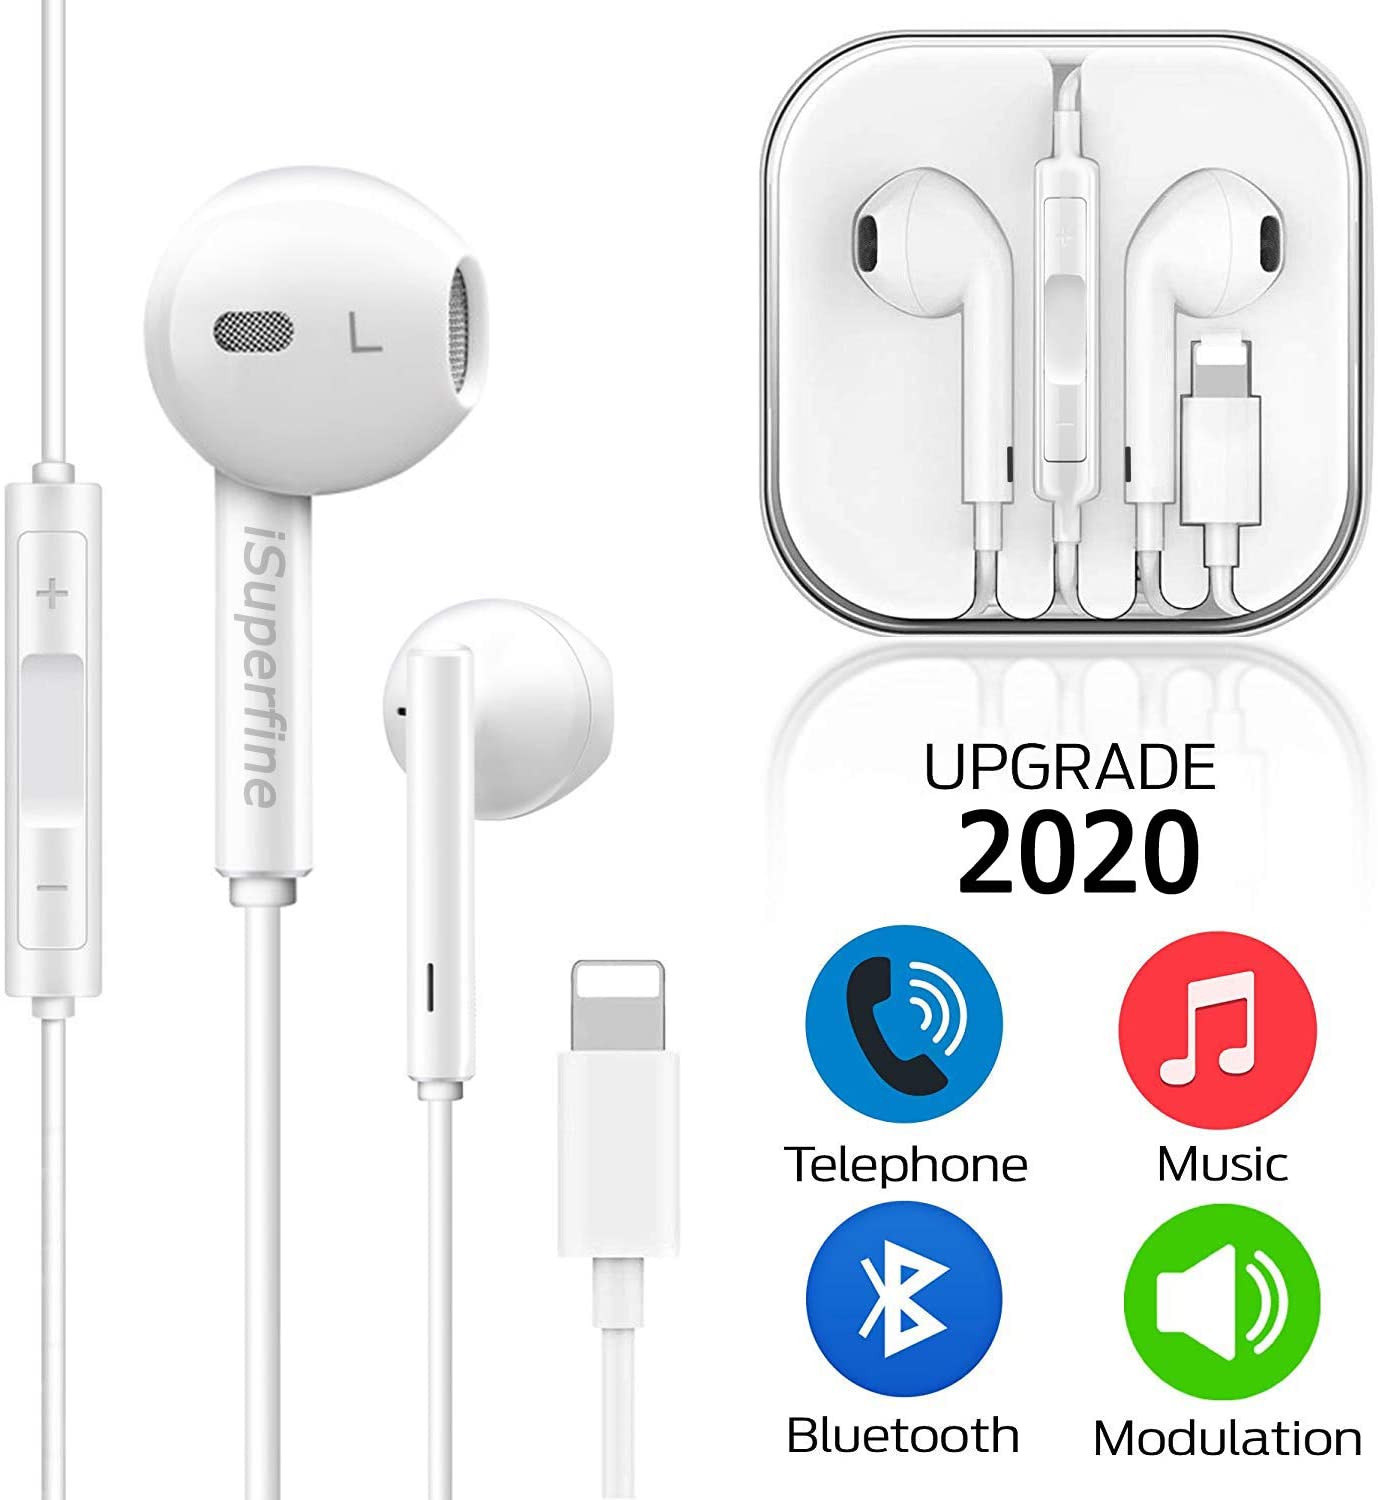 iSuperfine Earbuds Headset Wired Earphones Headphone with Microphone and Volume Control, Compatible with iPhone 11/11Pro/11Pro Max/Xs/XS Max/XR/X/8/8 Plus/7 and iOS 11/12/13 (White)